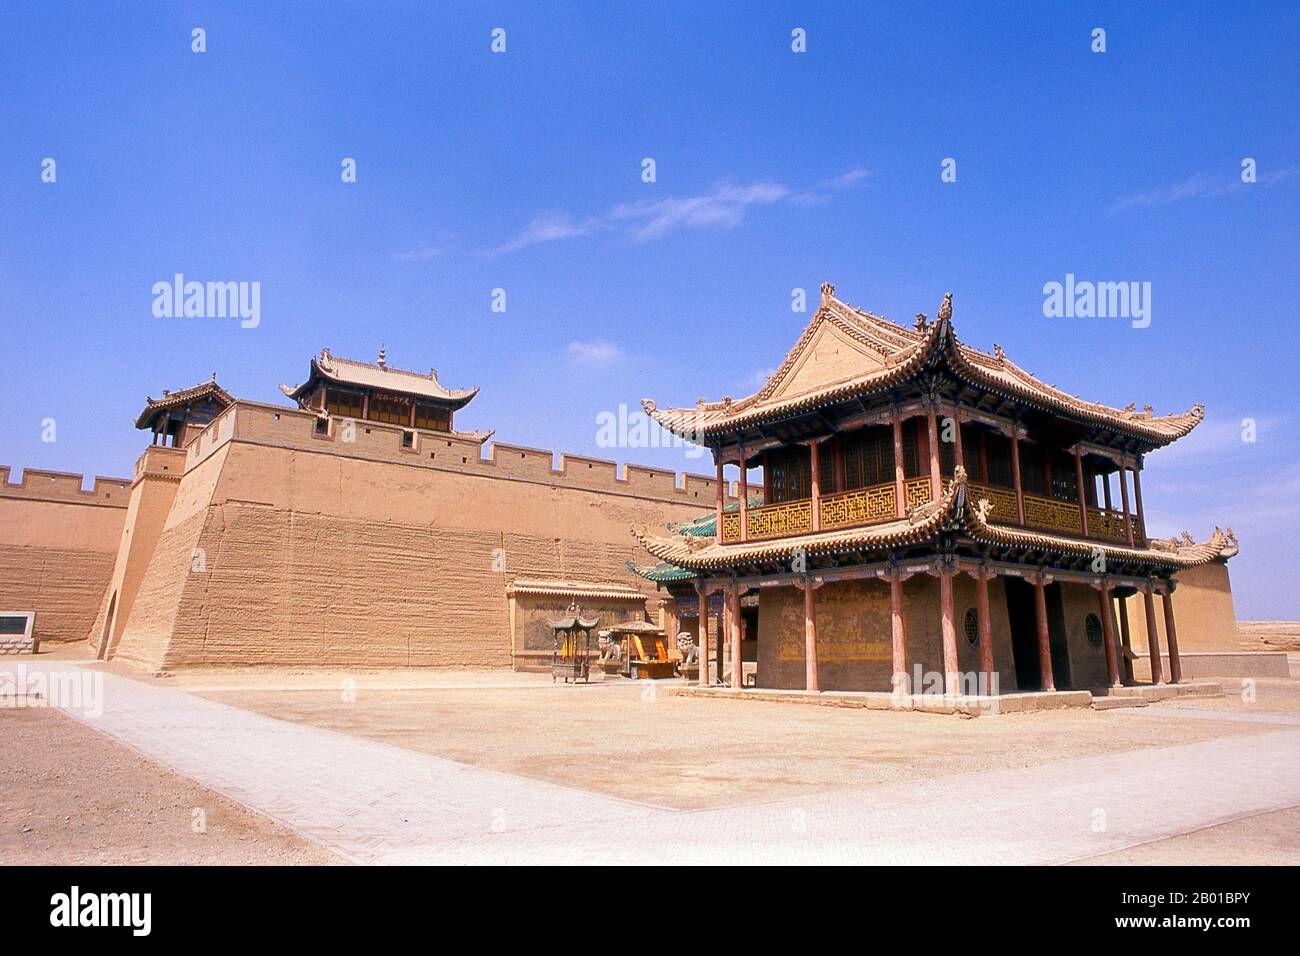 China: Wenchang Hall, Jiayuguan Fort, Jiayuguan, Gansu.  Jiayuguan, the ‘First and Greatest Pass under Heaven’, was completed in 1372 on the orders of Zhu Yuanzhang, the first Ming Emperor (1368-98), to mark the end of the Ming Great Wall. It was also the very limits of Chinese civilisation, and the beginnings of the outer ‘barbarian’ lands.  For centuries the fort was not just of strategic importance to Han Chinese, but of cultural significance as well. This was the last civilised place before the outer darkness, and those proceeding beyond faced a life of exile among nomadic strangers. Stock Photo